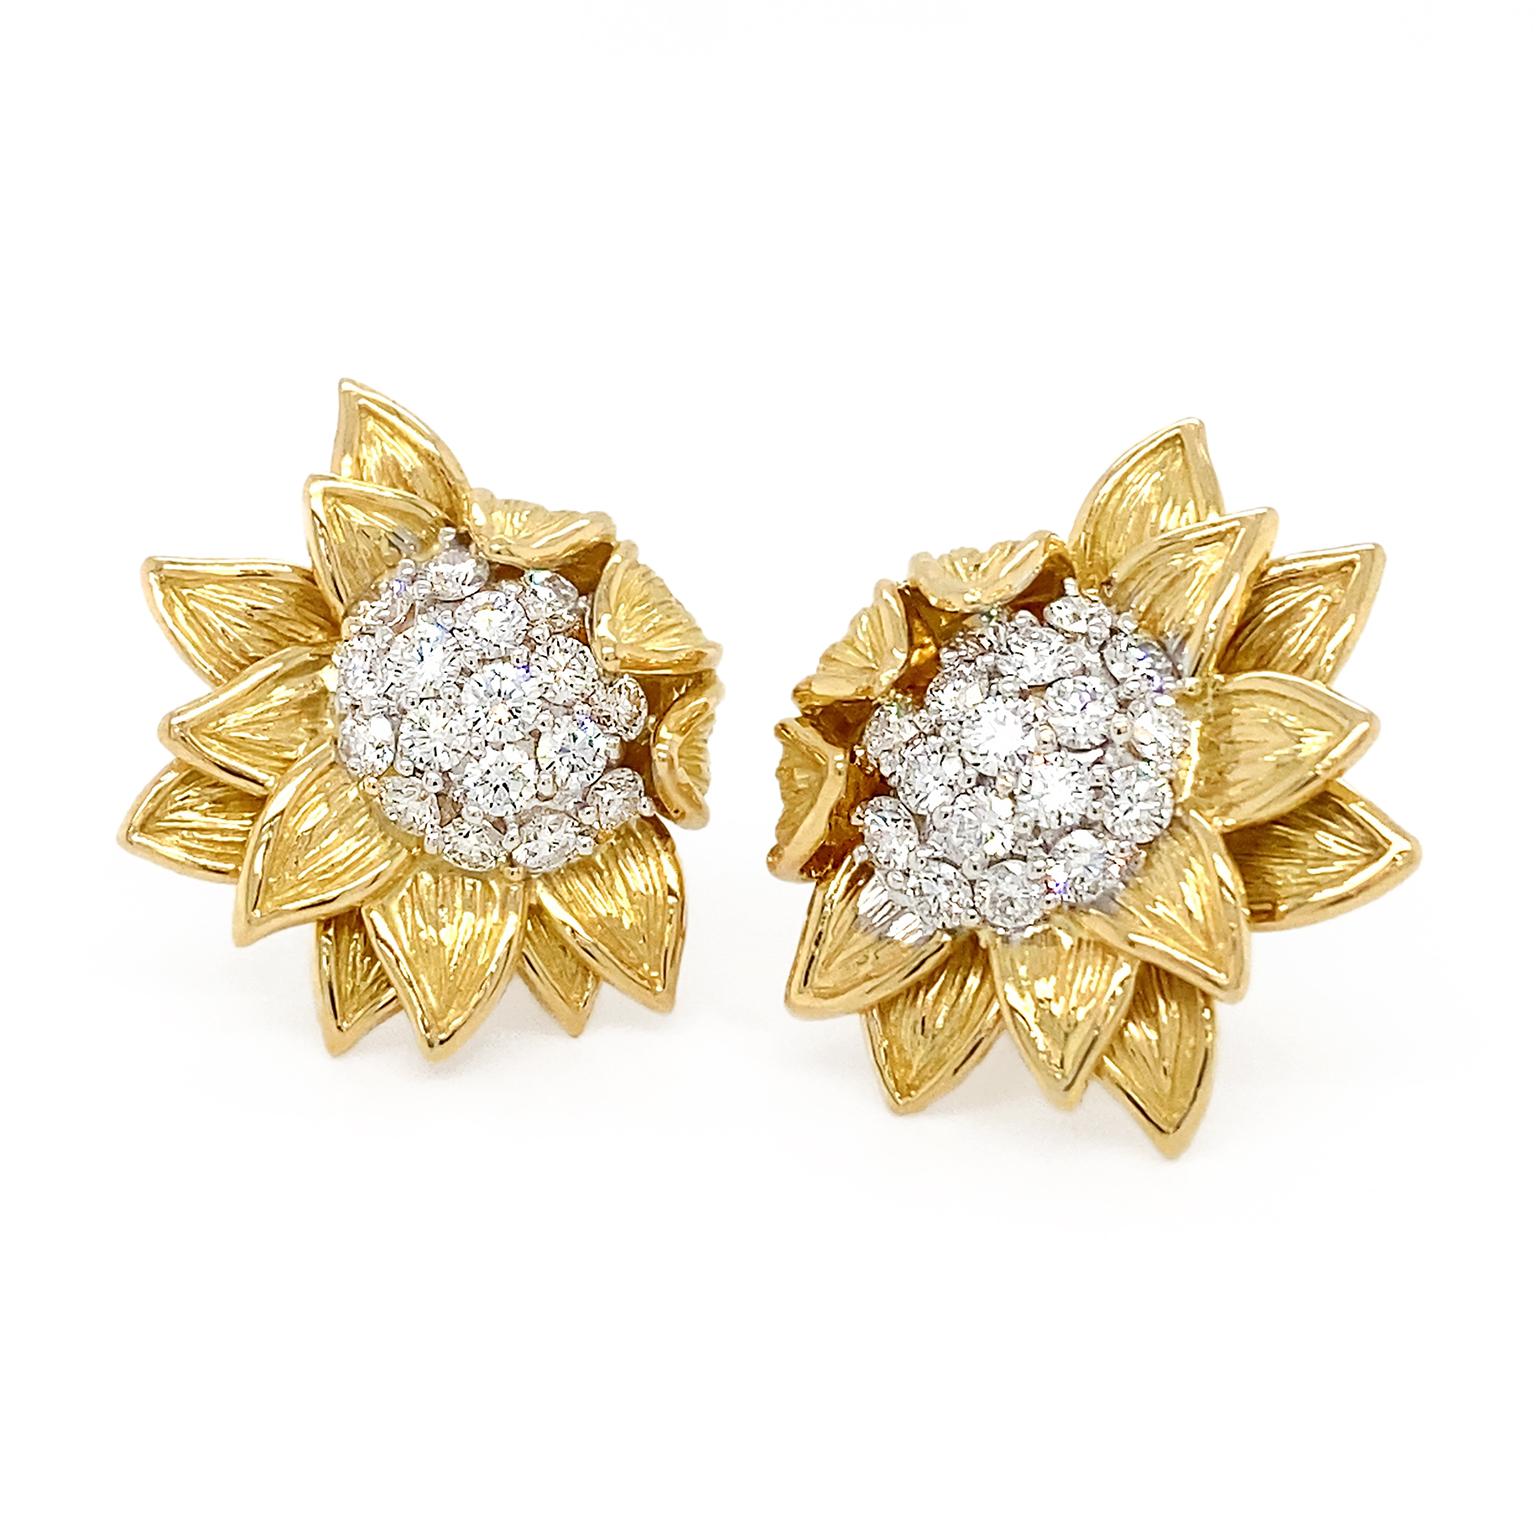 Bloomed sunflowers are illustrated by gold and diamonds. 18k yellow gold textured petals overlap and fold over each other, as they would in real life. A total of 34 round brilliant cut diamonds dance with light in the center. The total weight is